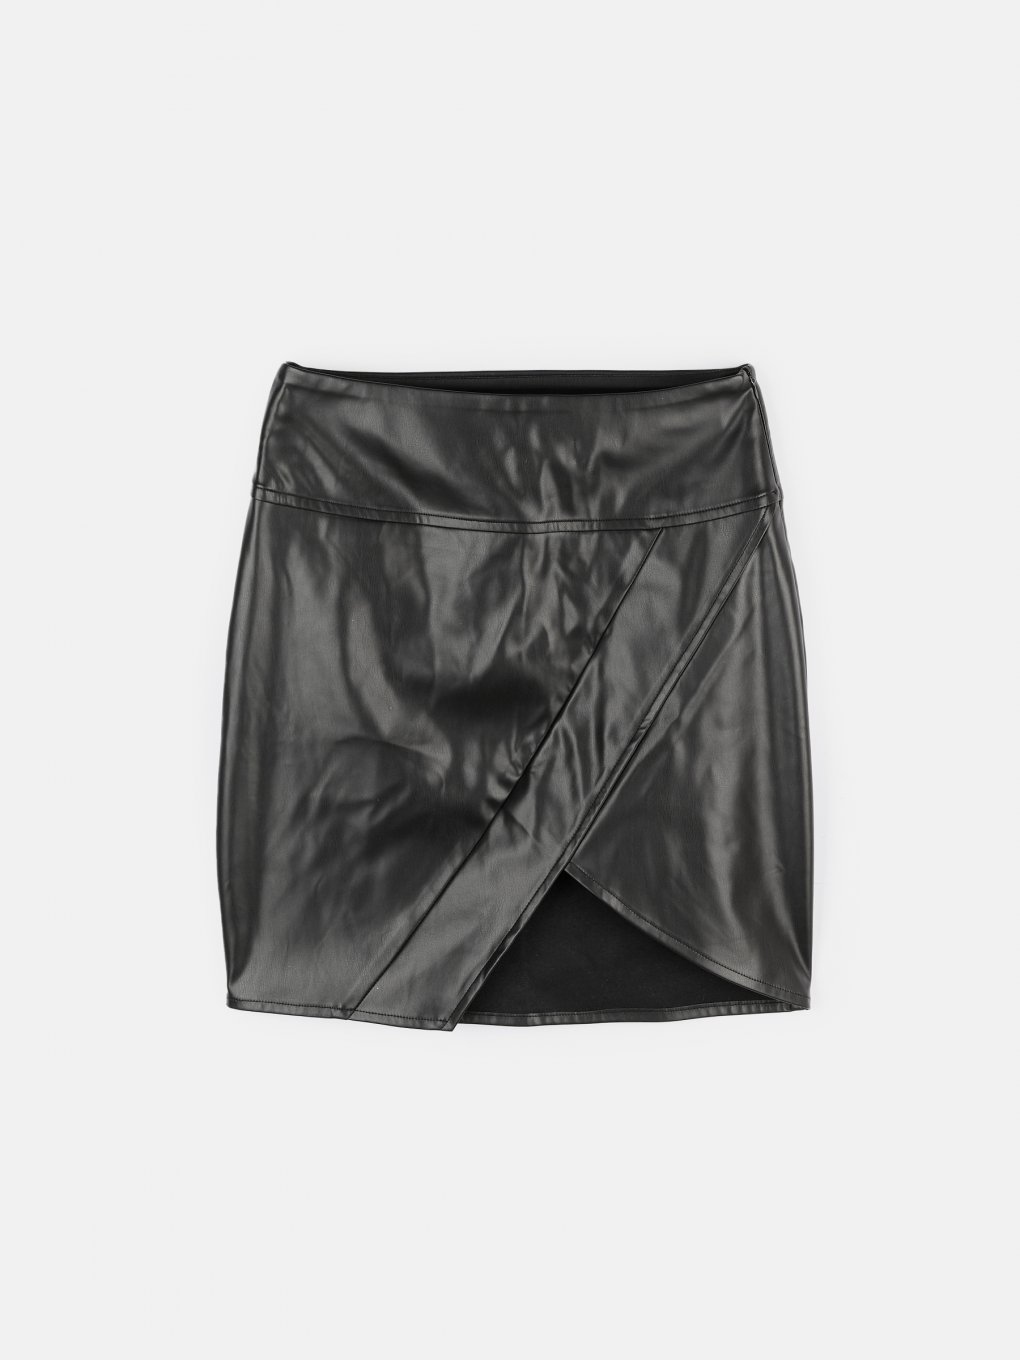 Faux leather bodycon skirt